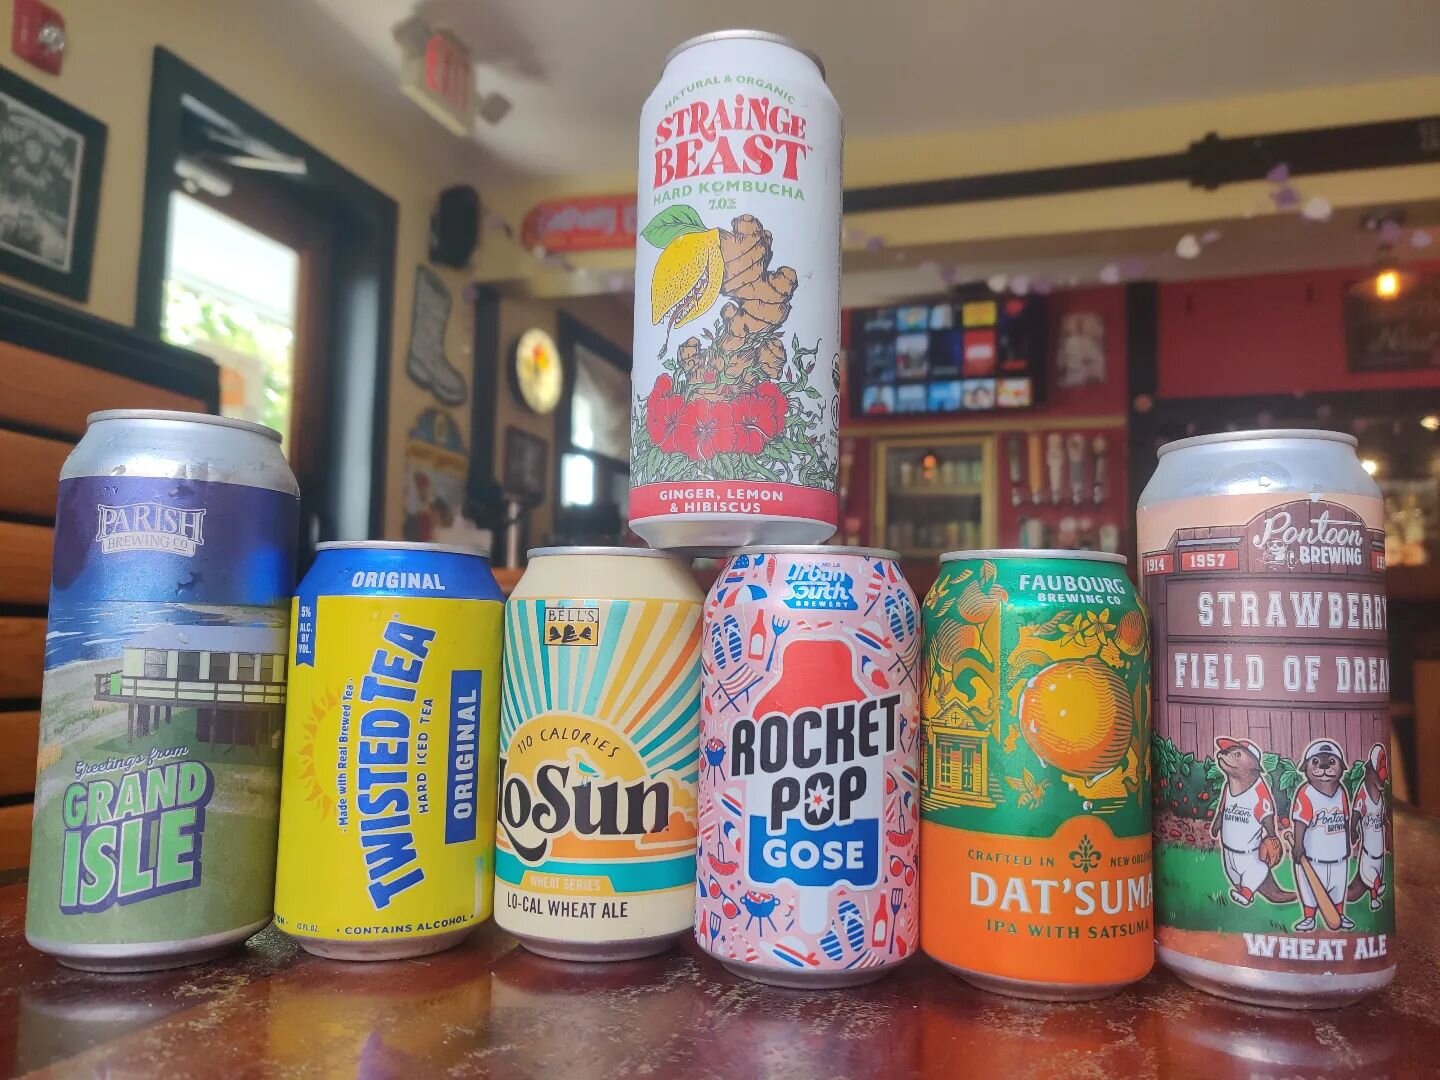 It's Summertime in the city 🥵 stay cool out there with some of this week's recommendations!